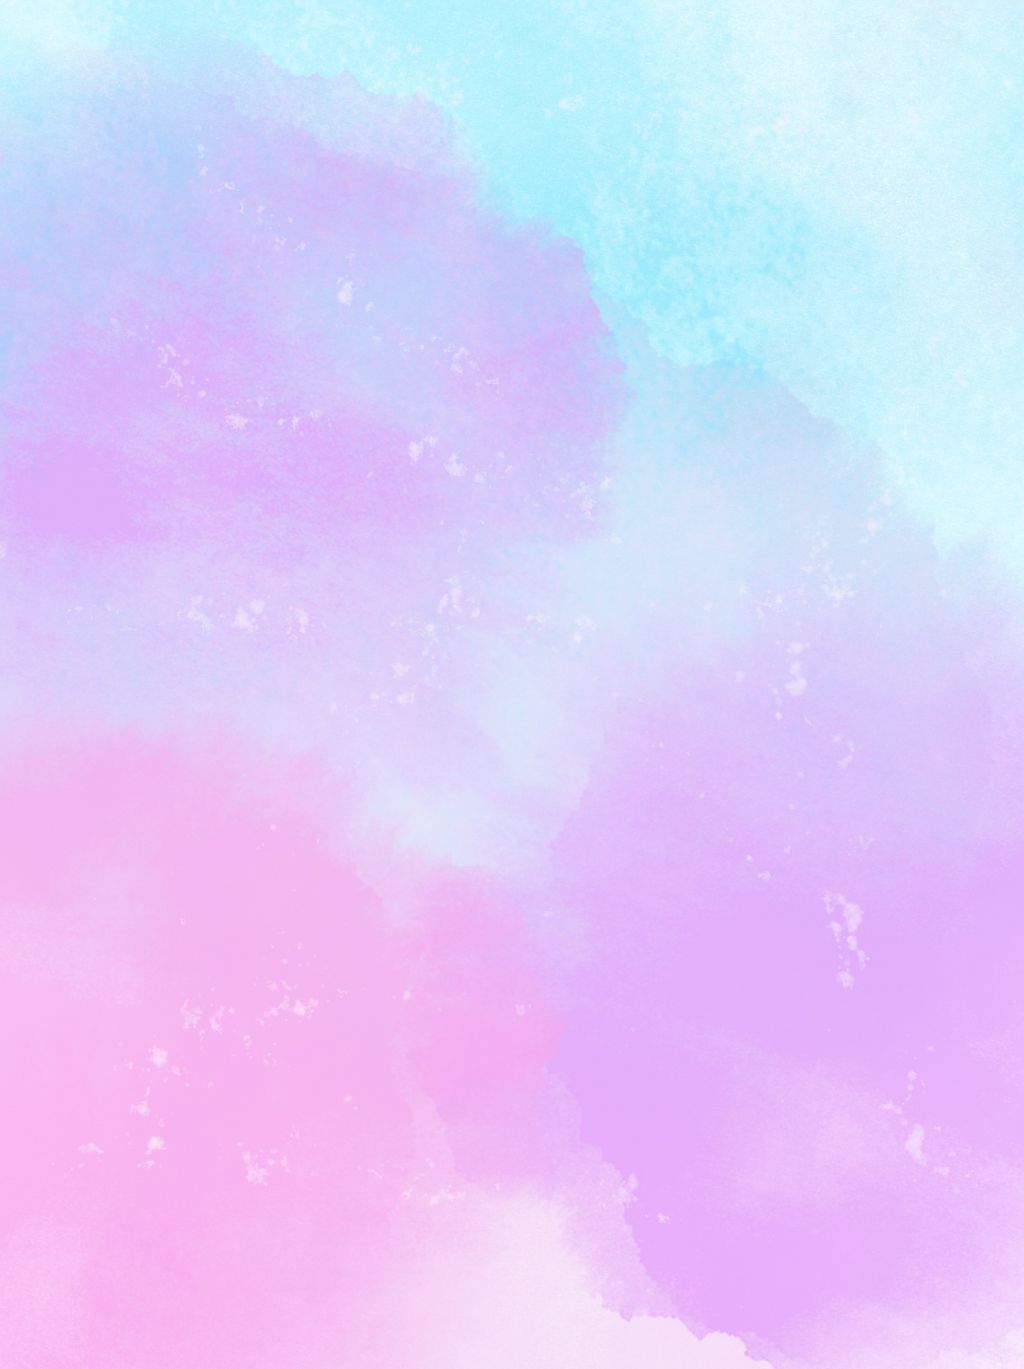 Pink Purple Blue Watercolor Background. Pink and purple background, Cute pink background, Floral watercolor background